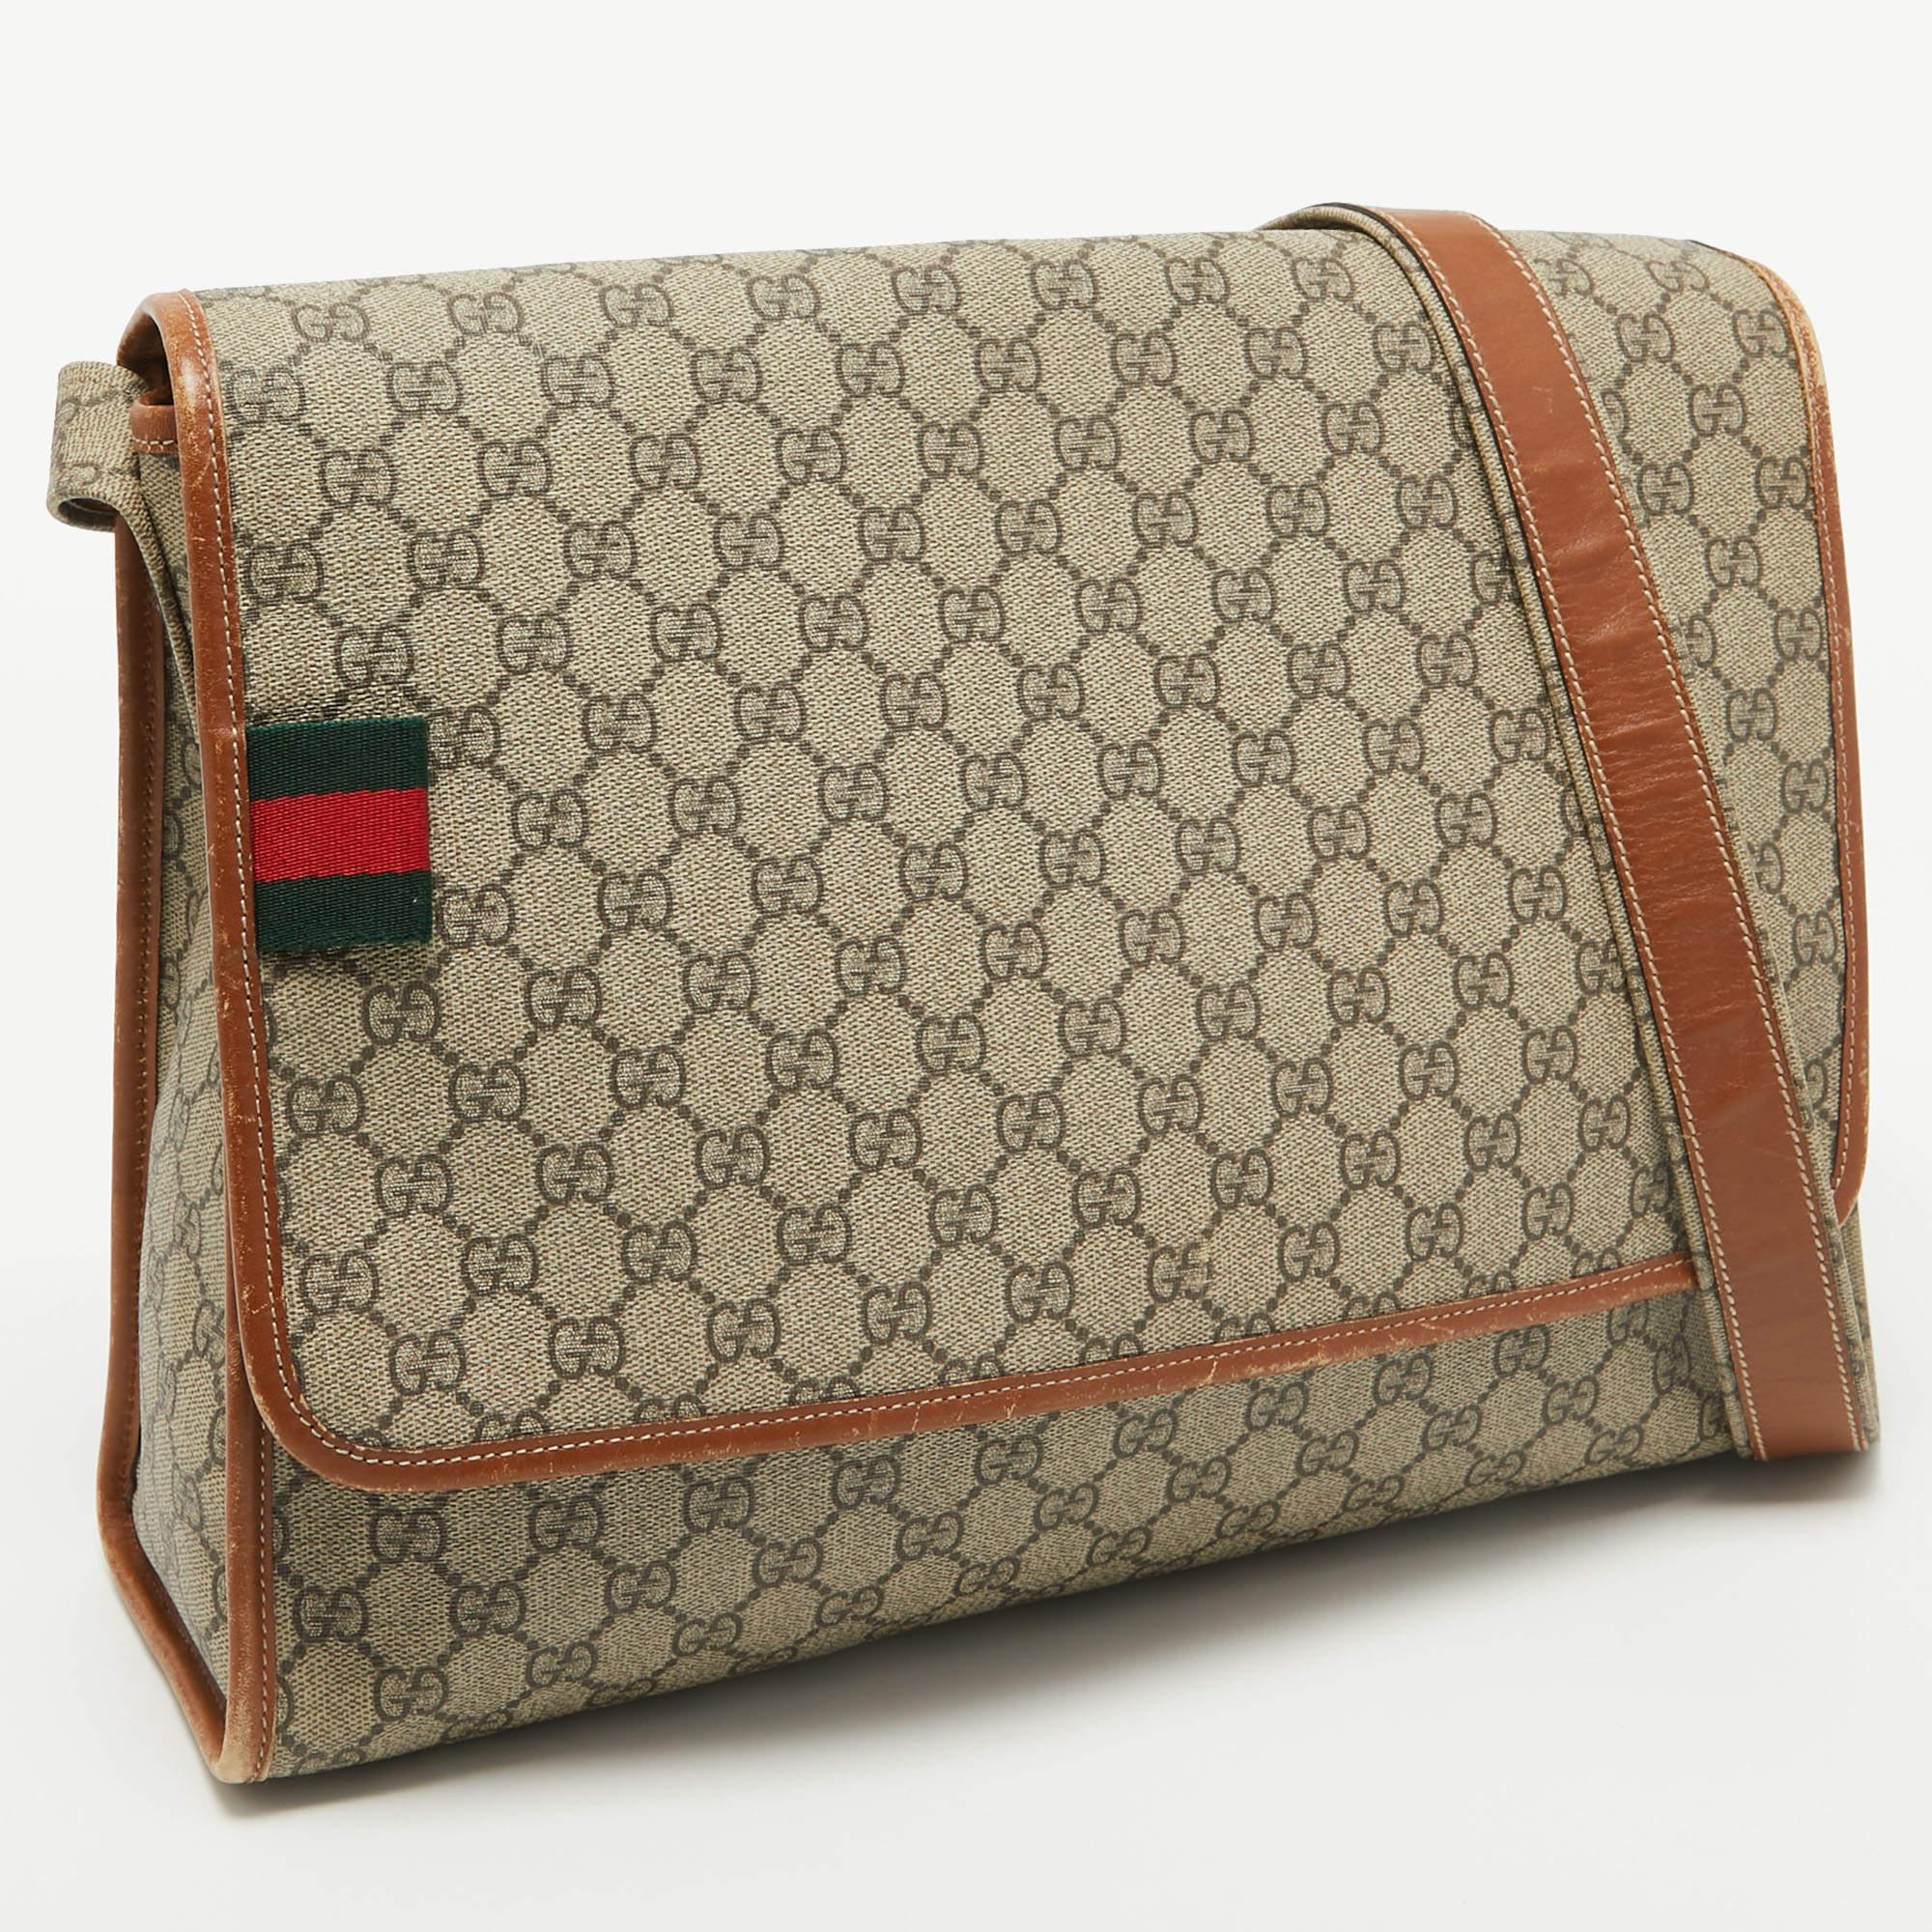 Gucci Beige/Brown GG Supreme Canvas And Leather Messenger Bag For Sale 5